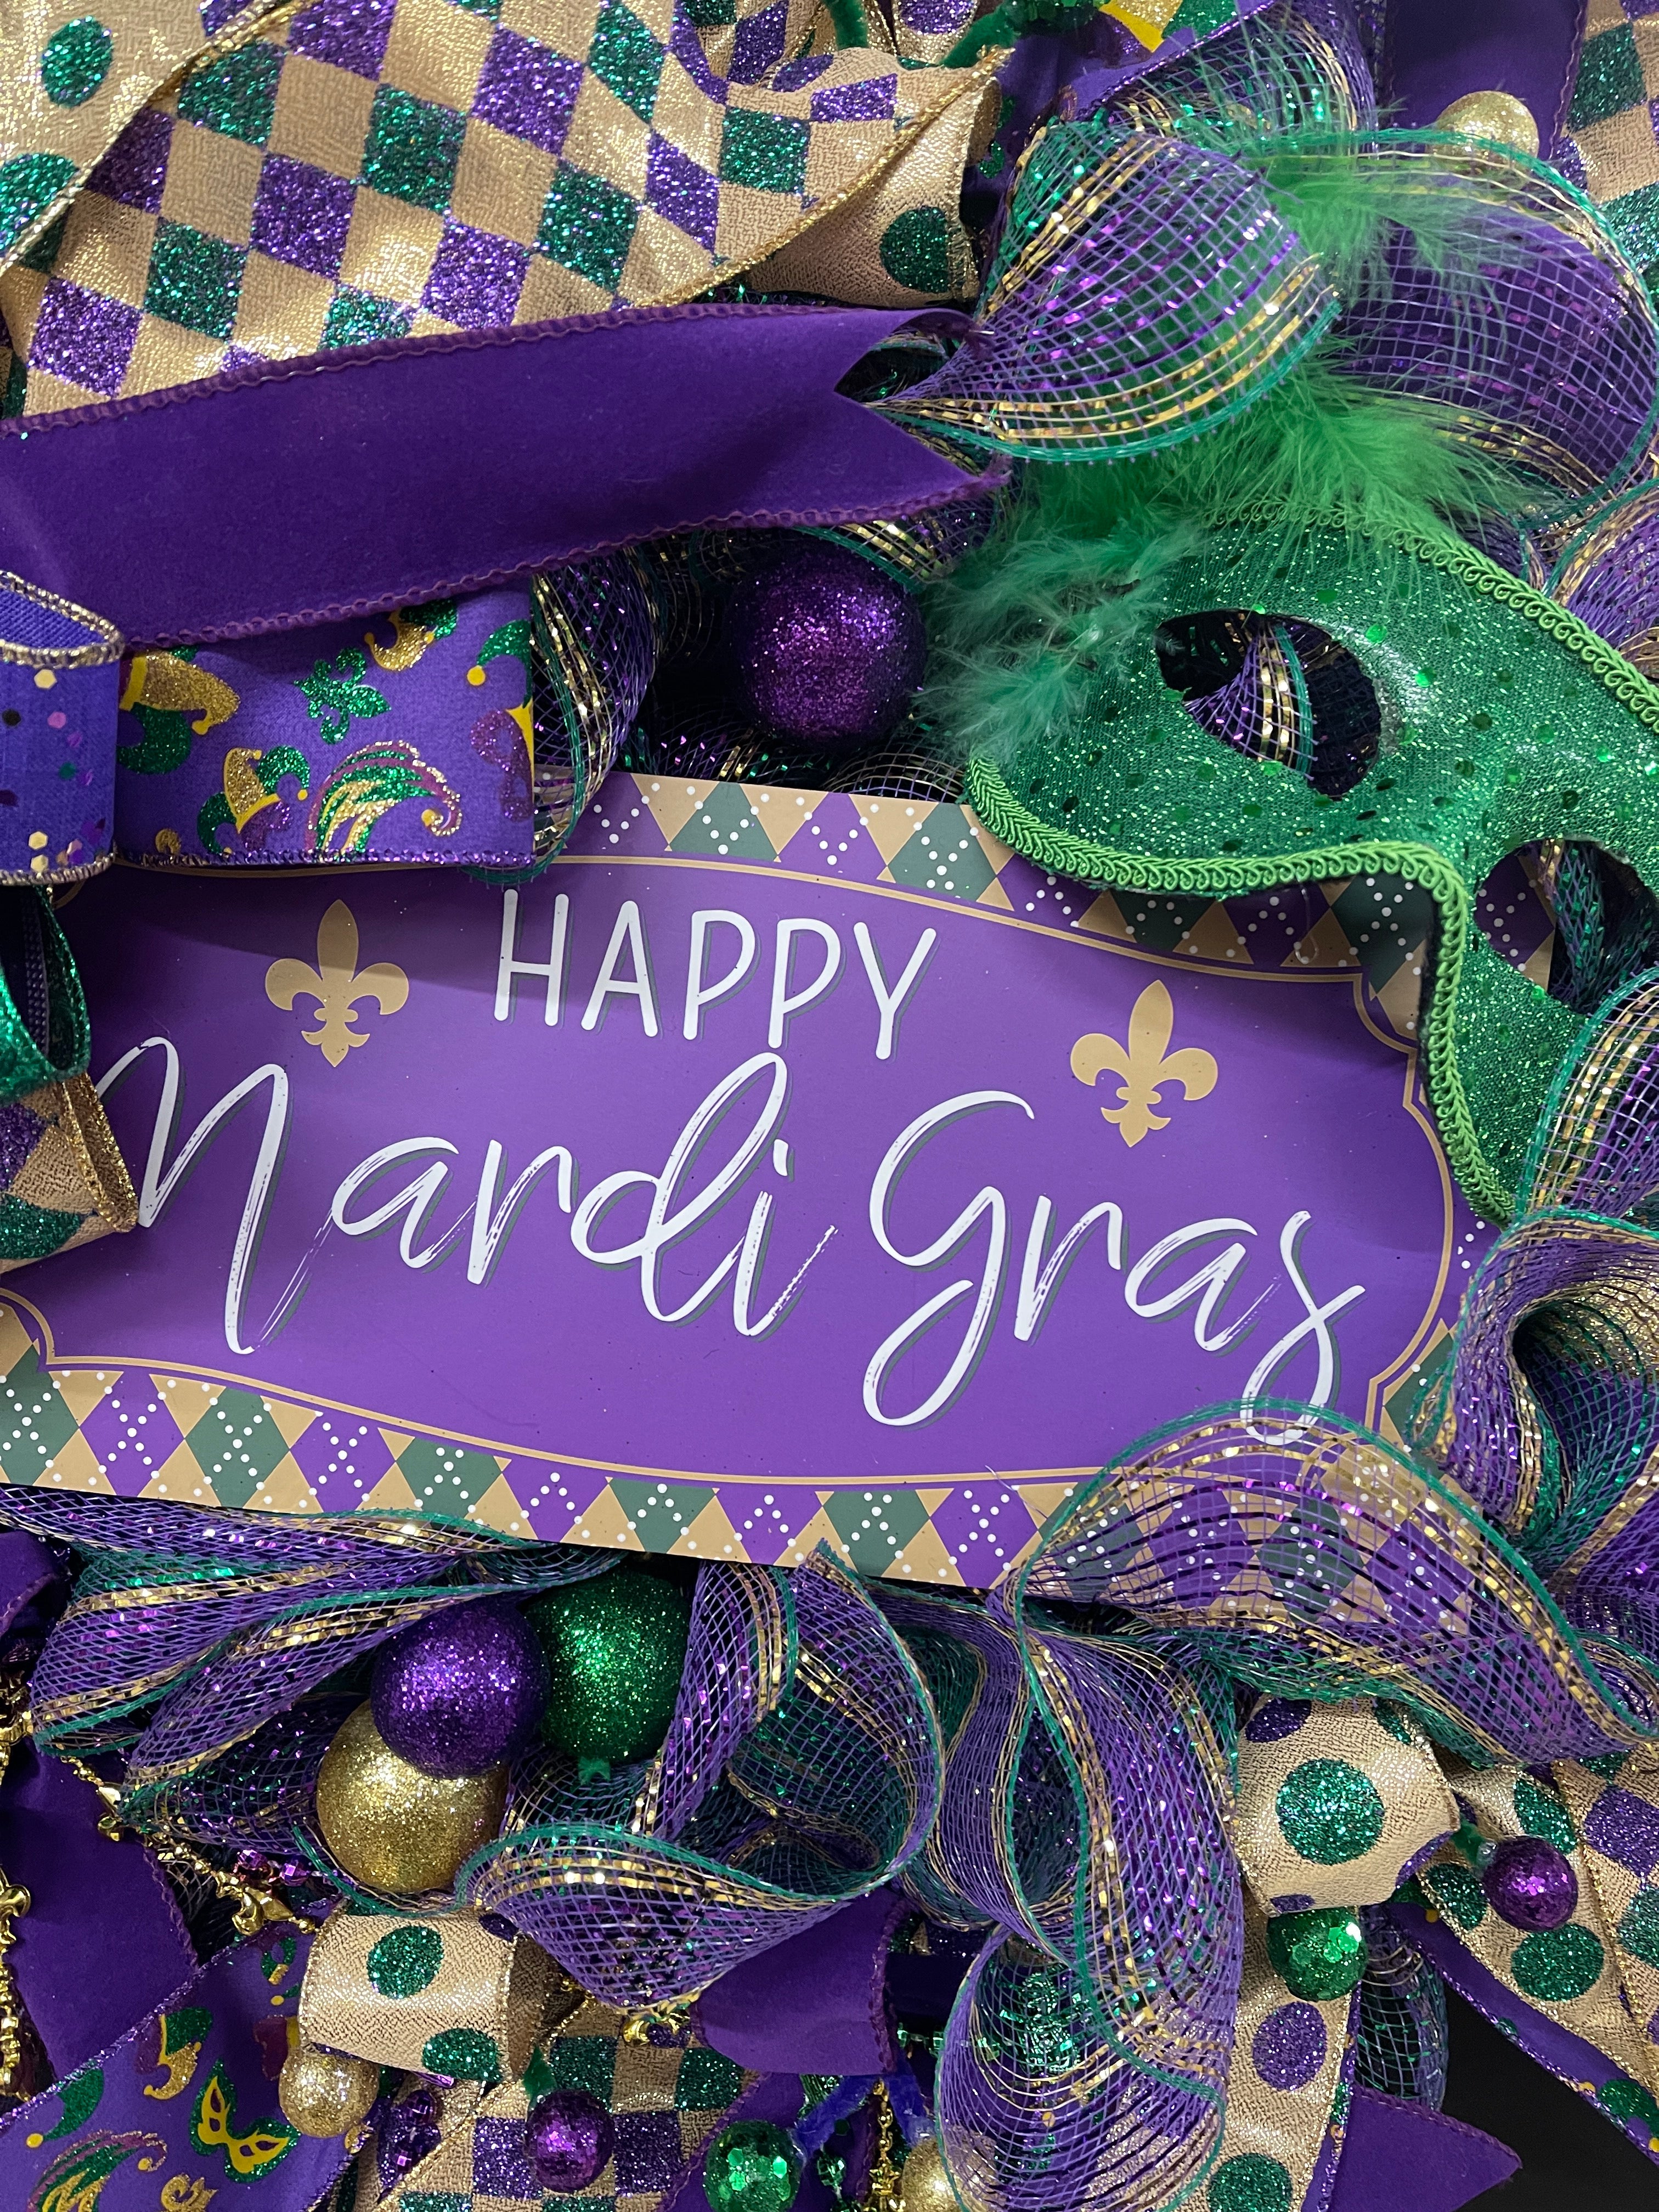 Close Up Detail of Happy Mardi Gras Sign with Fleur De Lies, and Purple, Green and Gold Harlequin Print